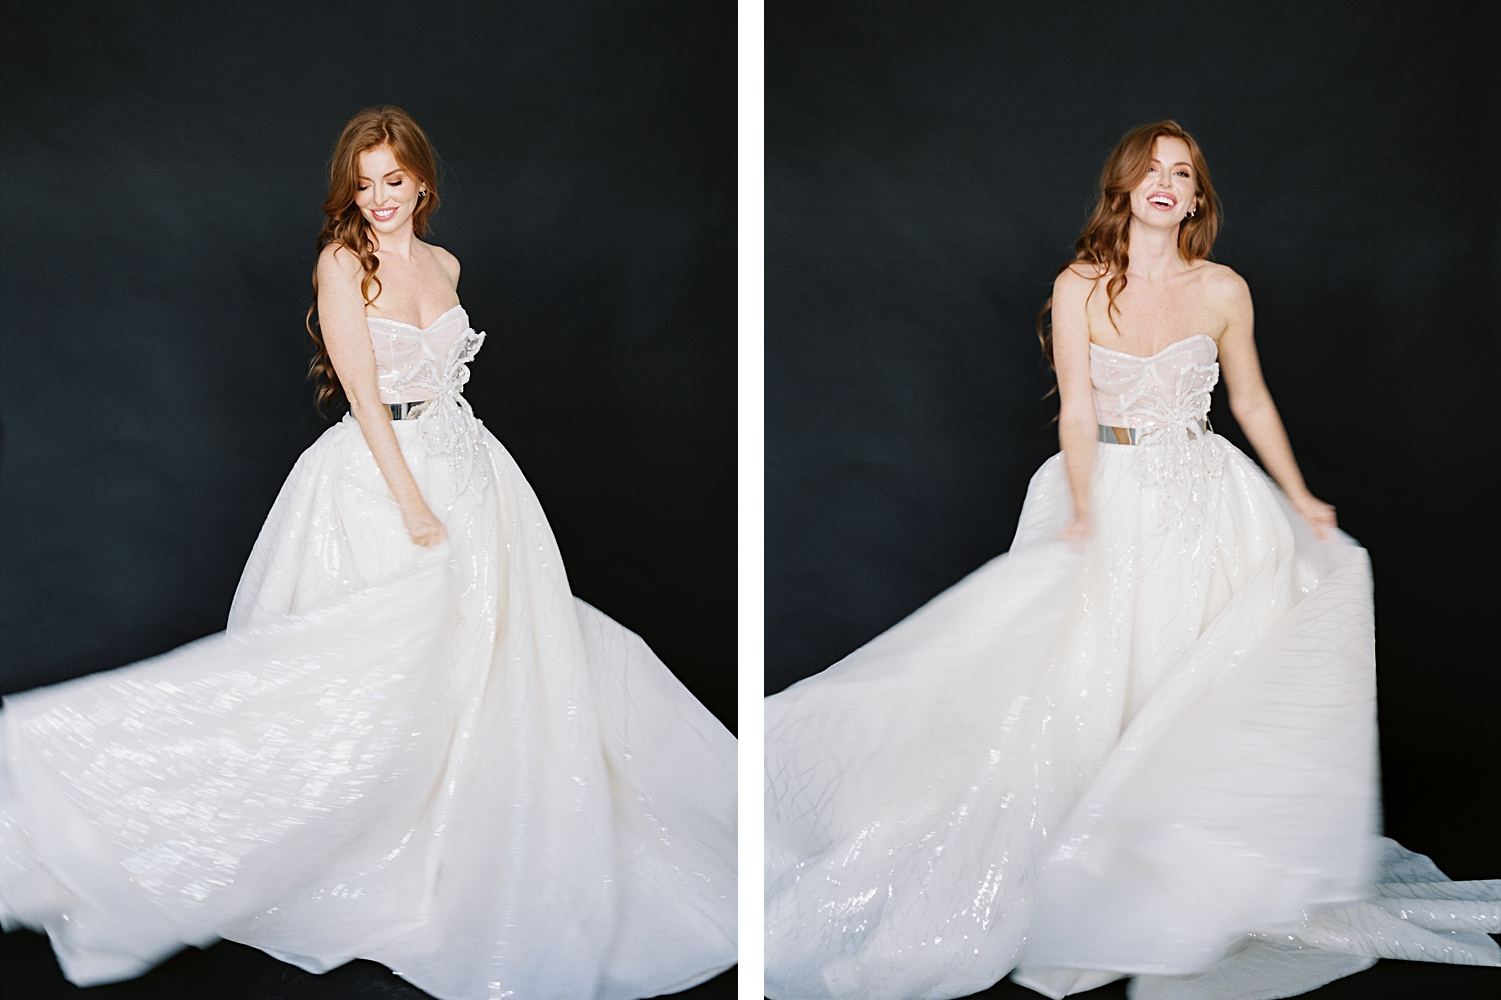 red headed girl in sparkling white wedding gown laughing